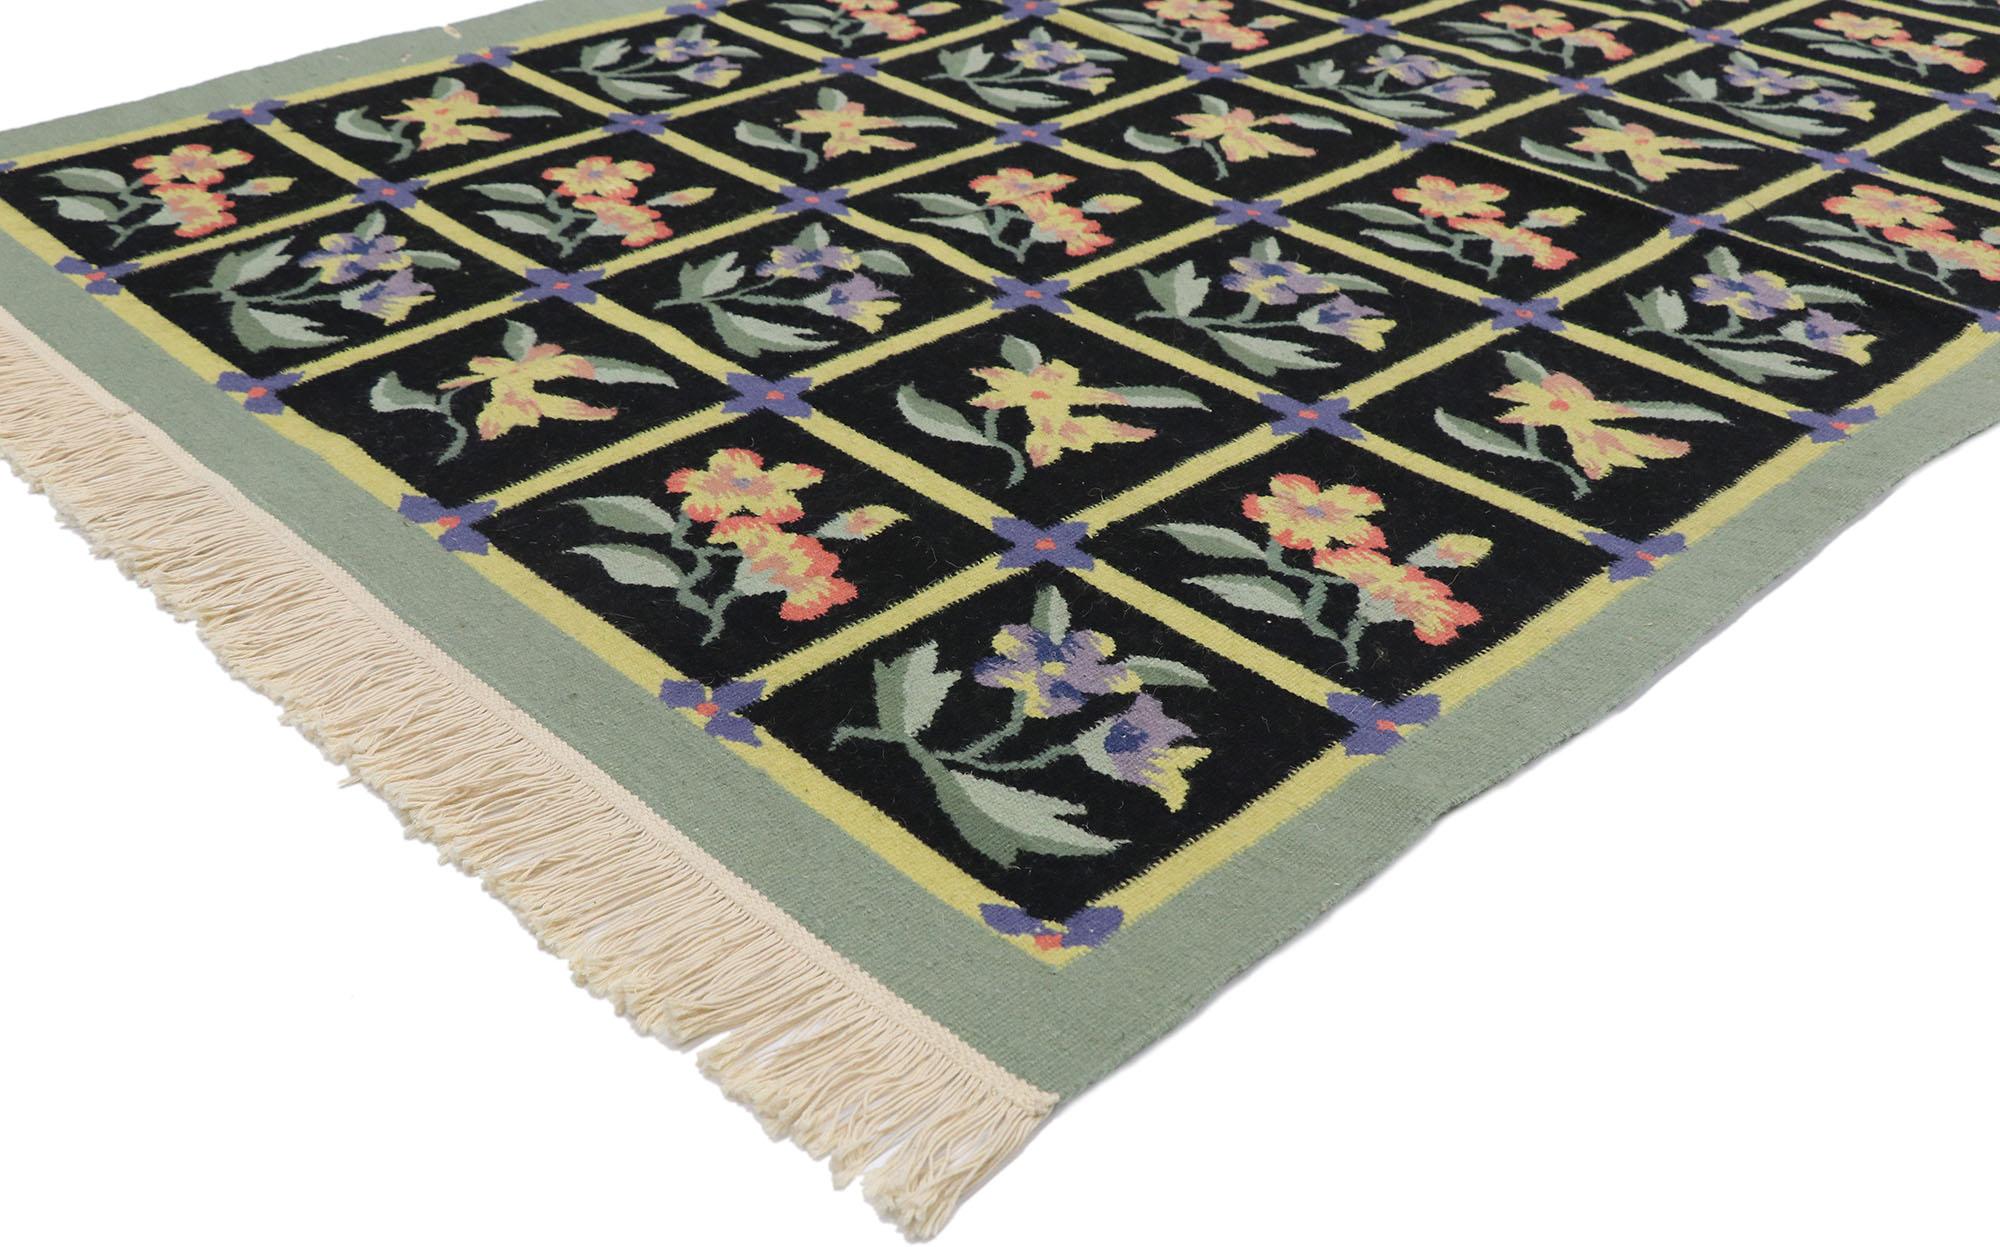 78026 vintage Chinese Floral Kilim rug with English Country Cottage style 04'01 x 06'03?. Cleverly composed and distinctively well-balanced, this hand-woven wool vintage Chinse floral kilim rug will take on a curated lived-in look that feels